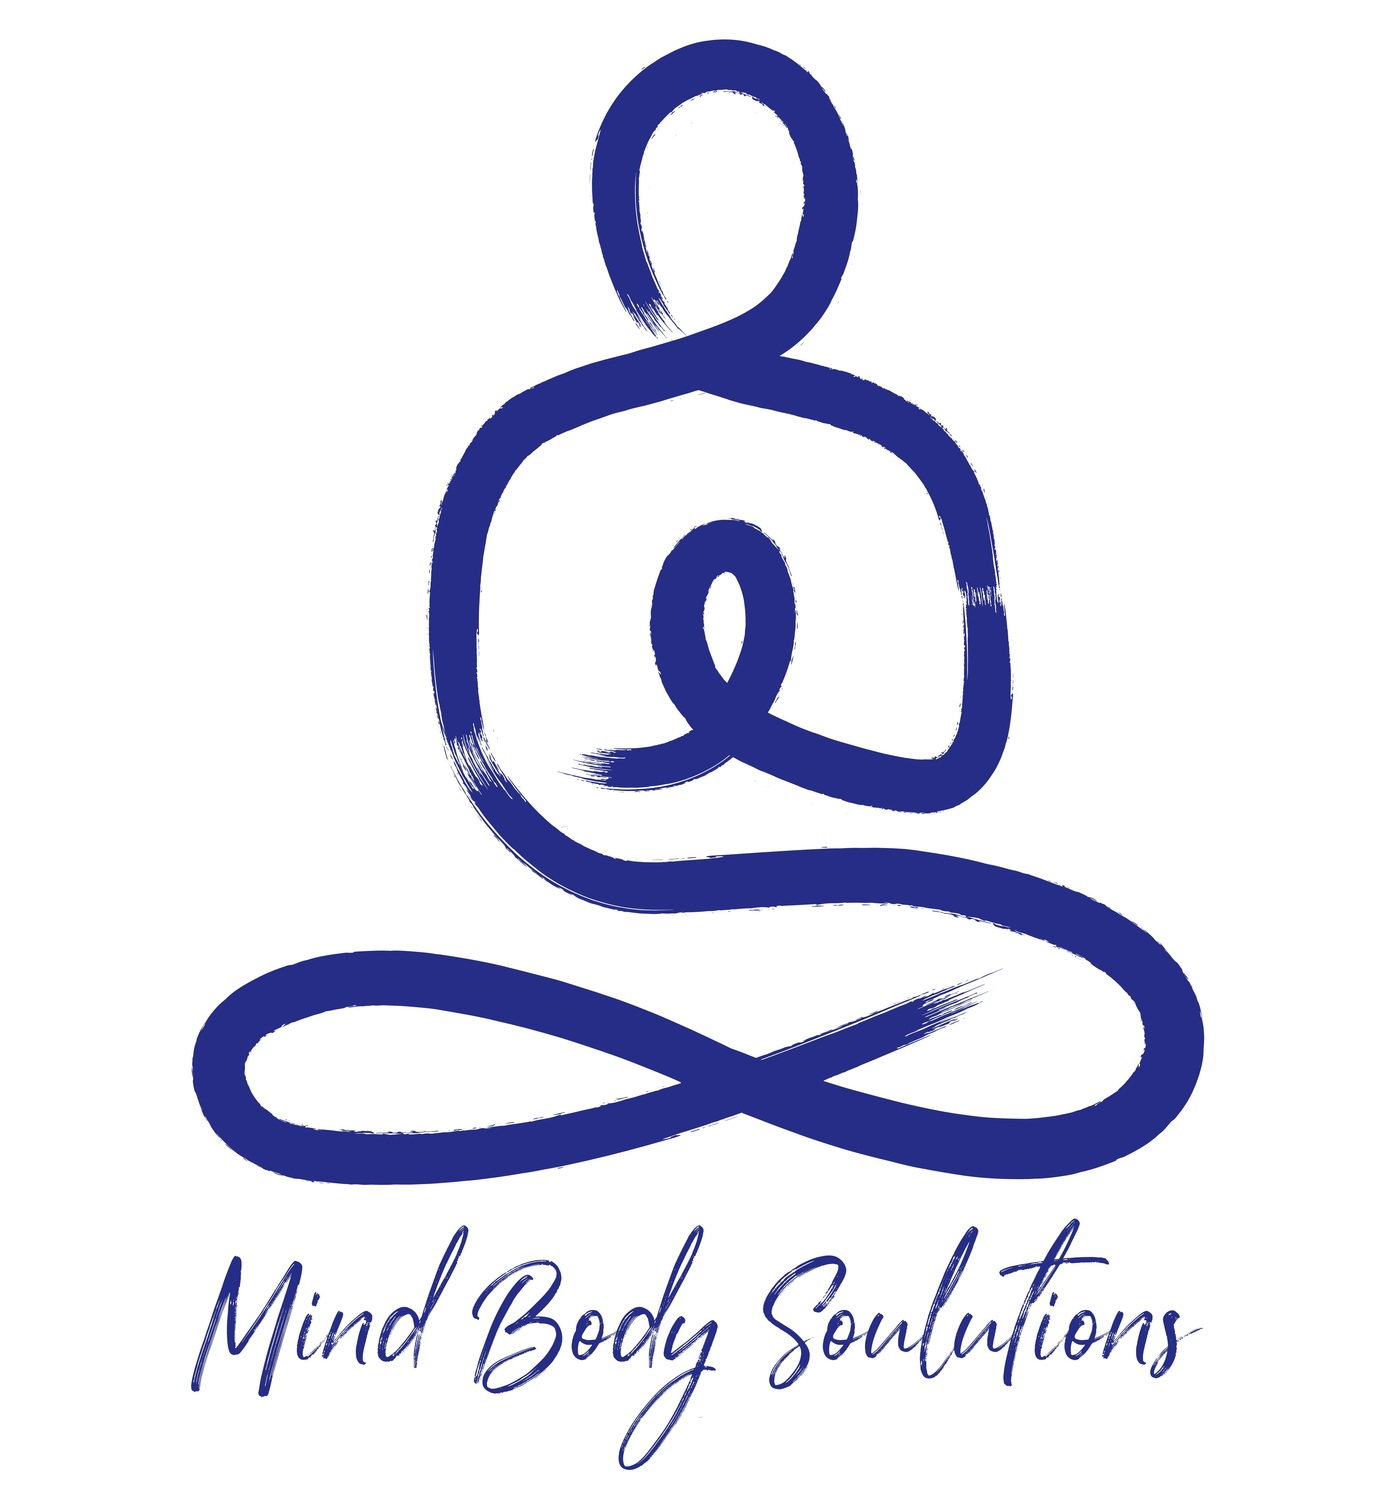 Gallery Photo of www.mindbodysoulutionsllc.com
Counseling, education, supervision 